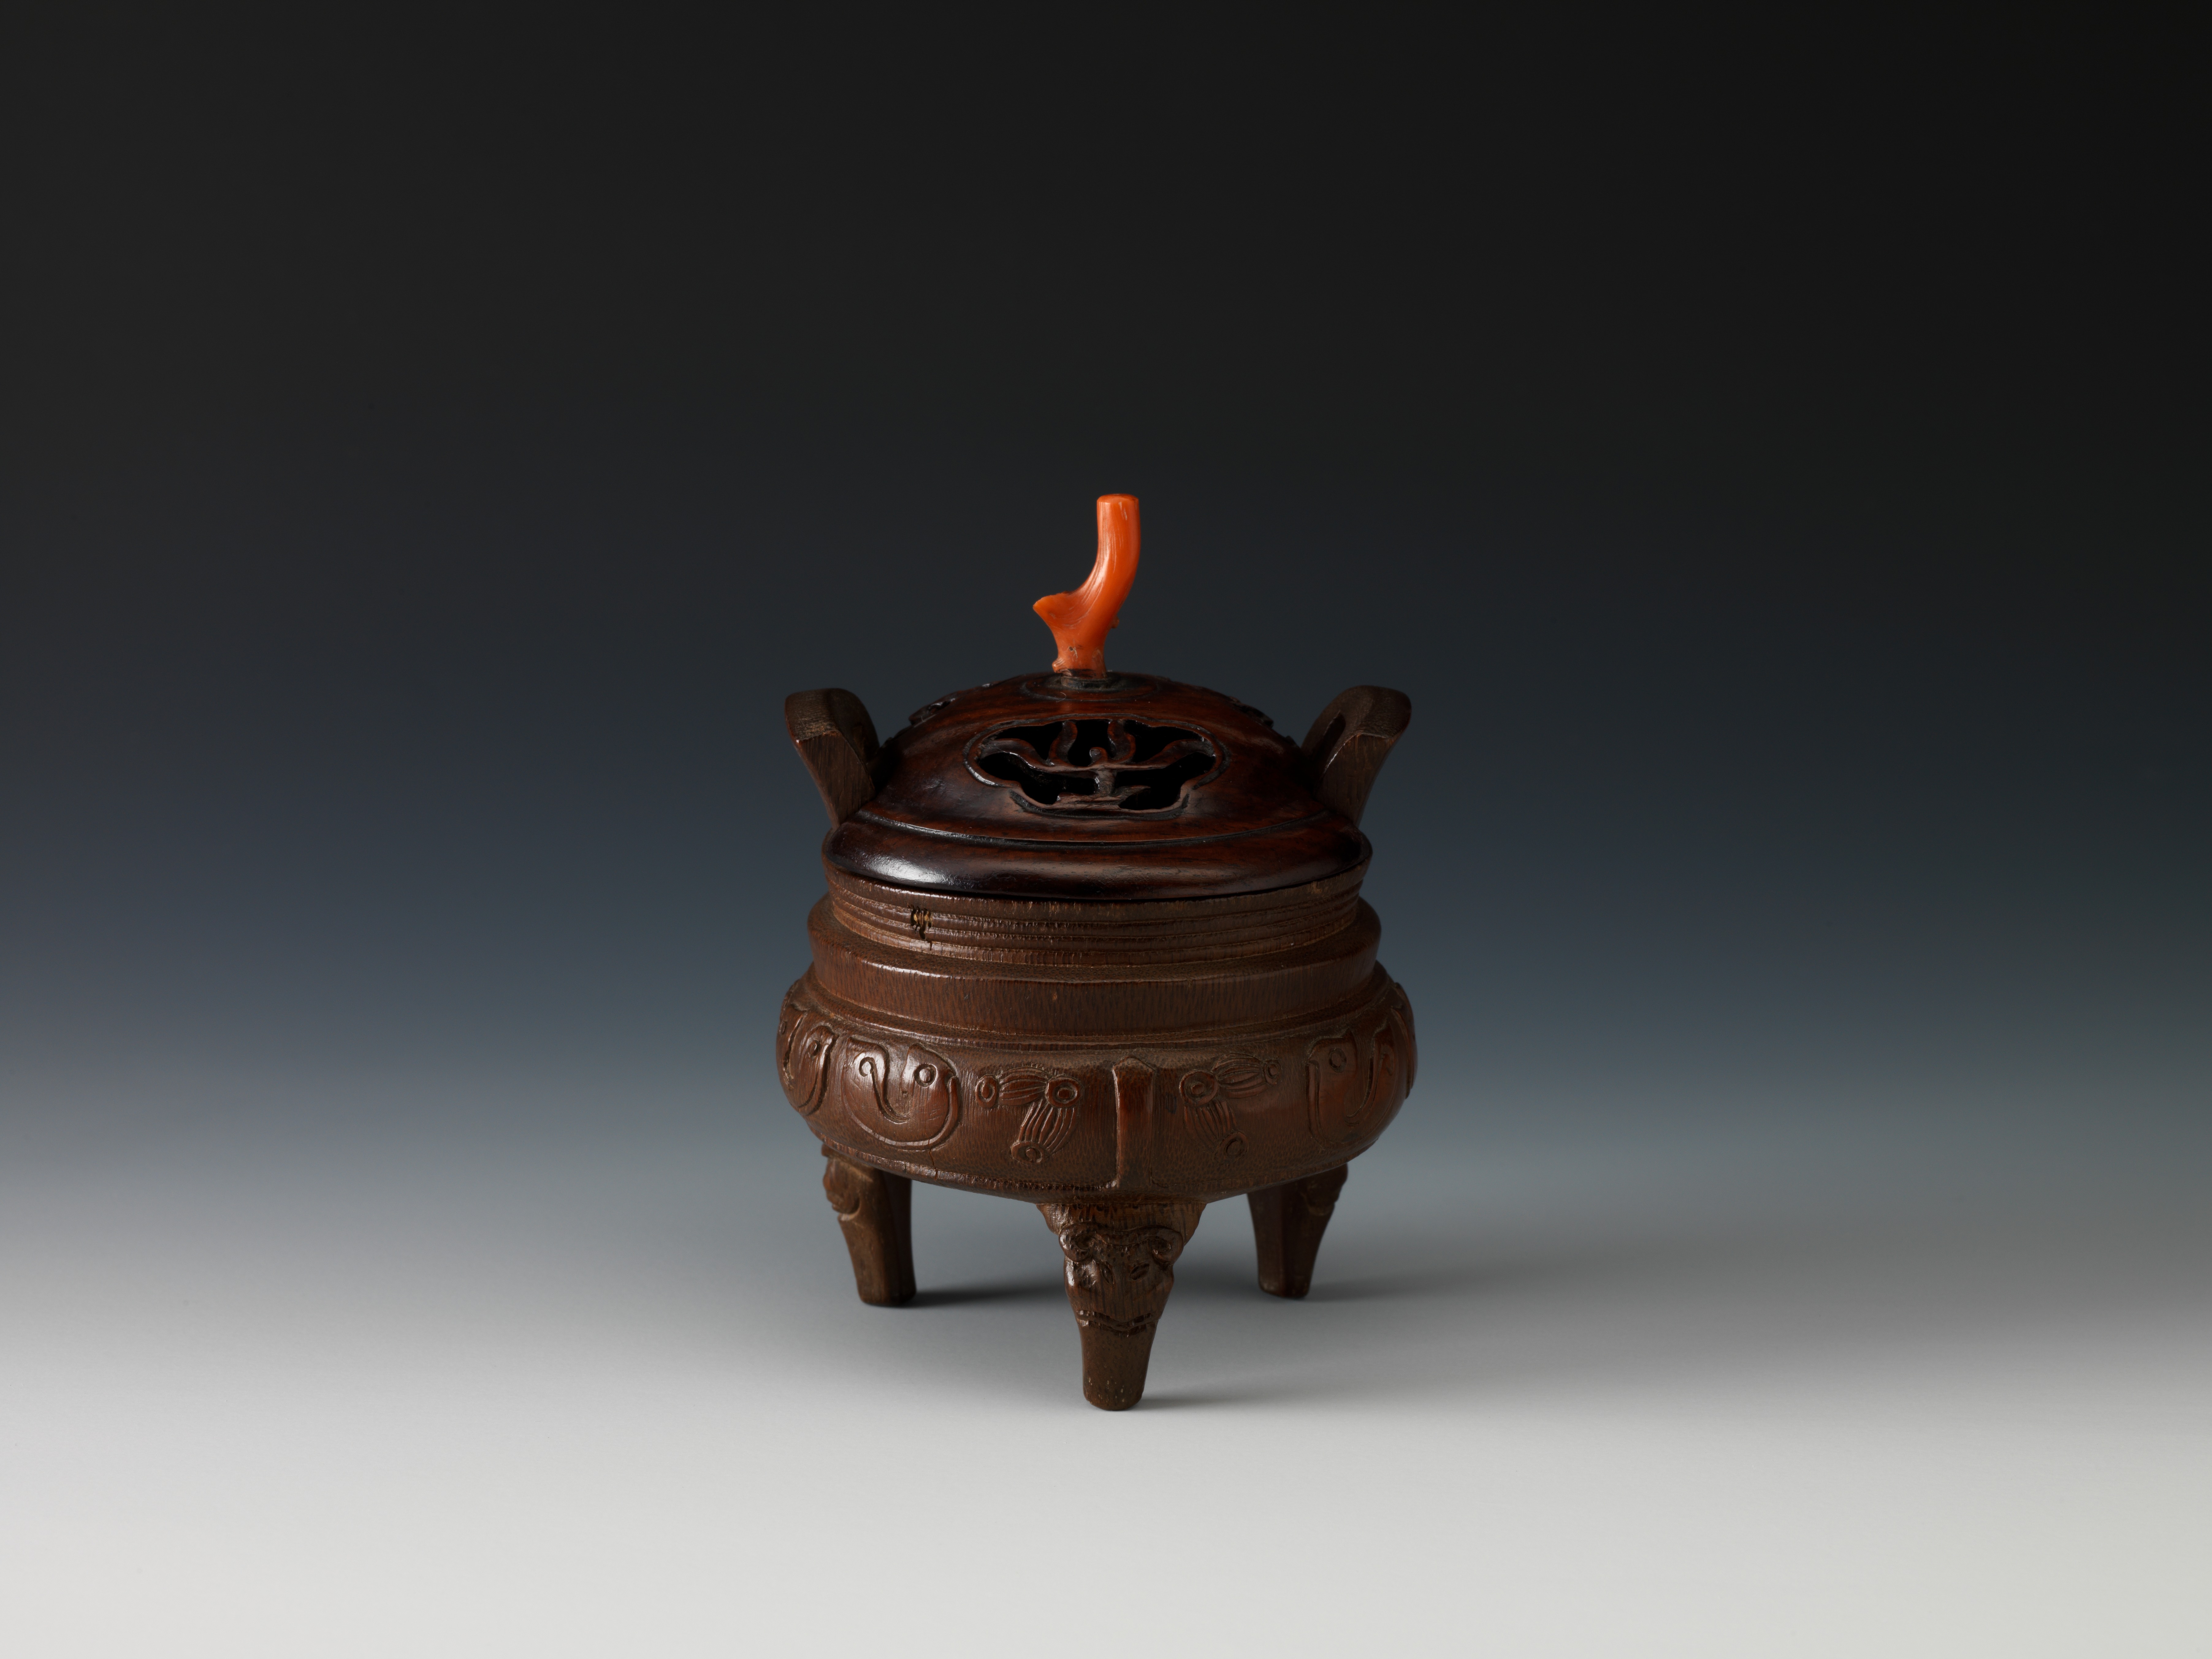 Incense-burner carved in the round